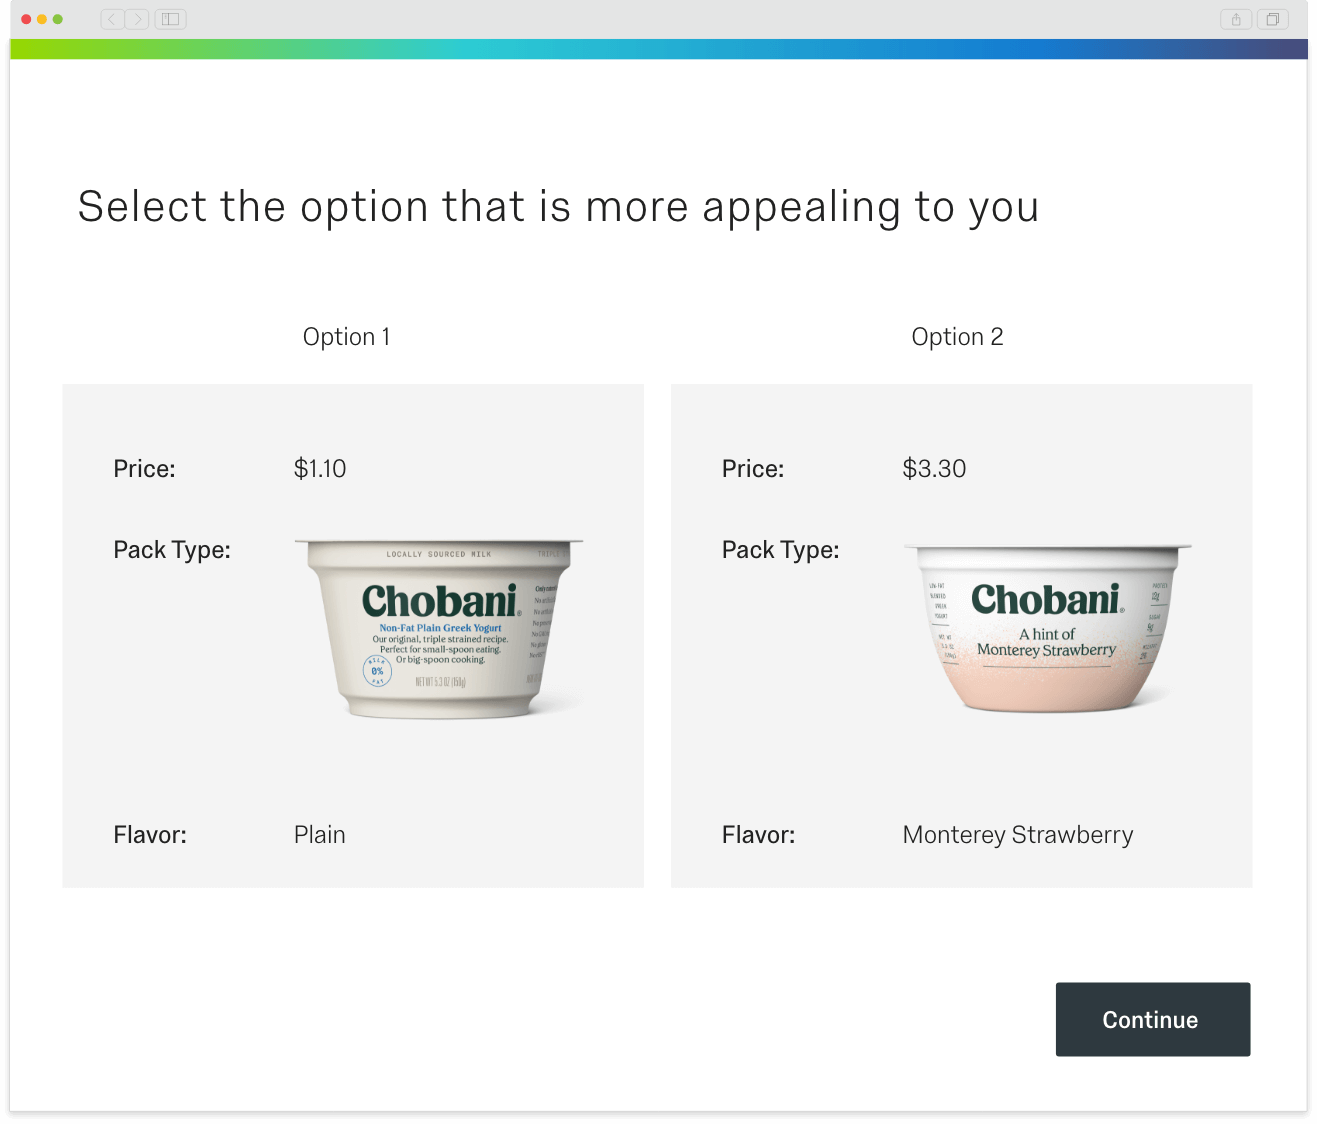 Chobani product research question - Select the option that is more appealing to you